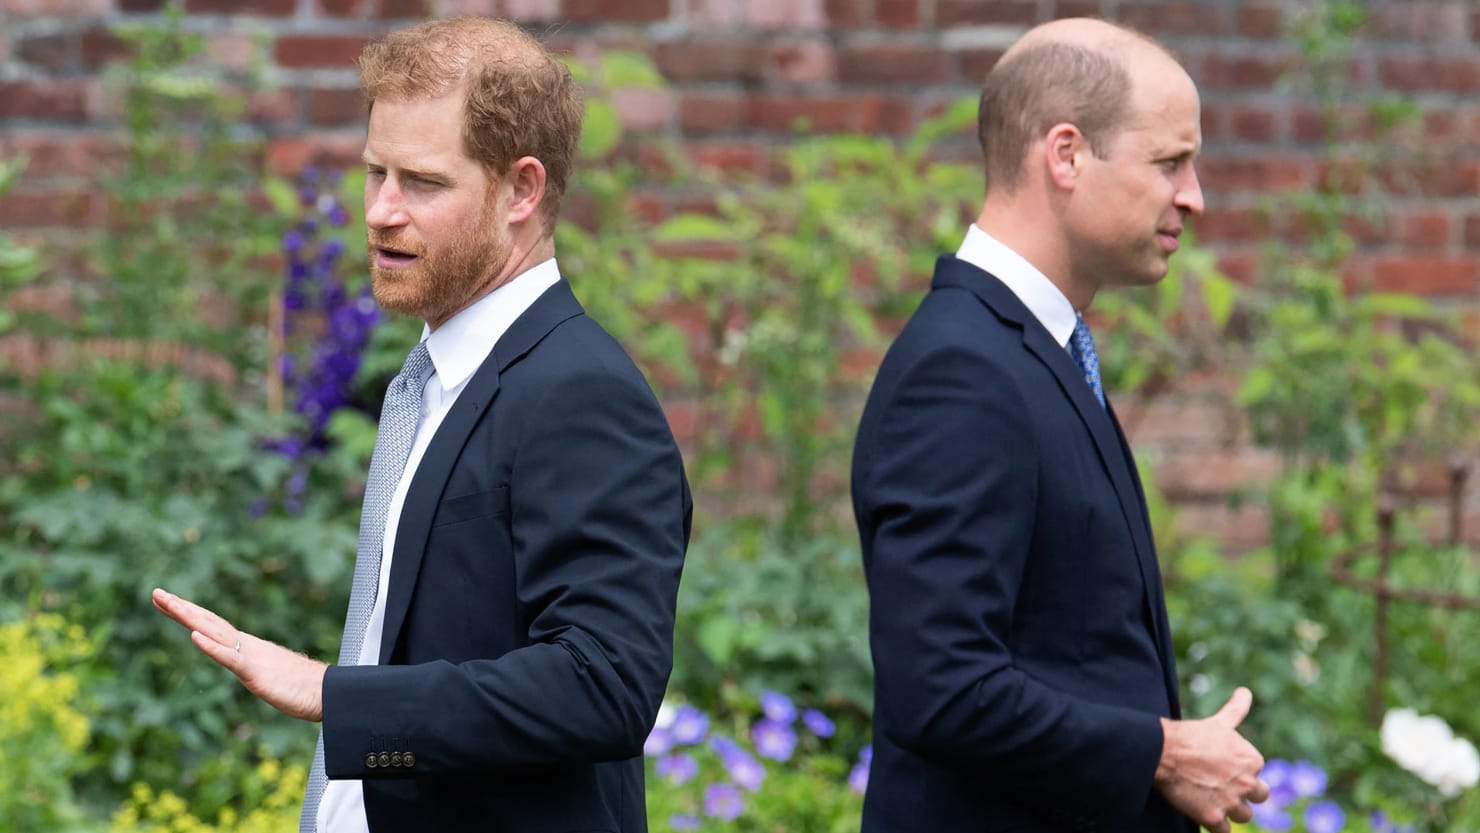 Prince William Has ‘No Plans’ to Talk About Prince Harry on New York Trip